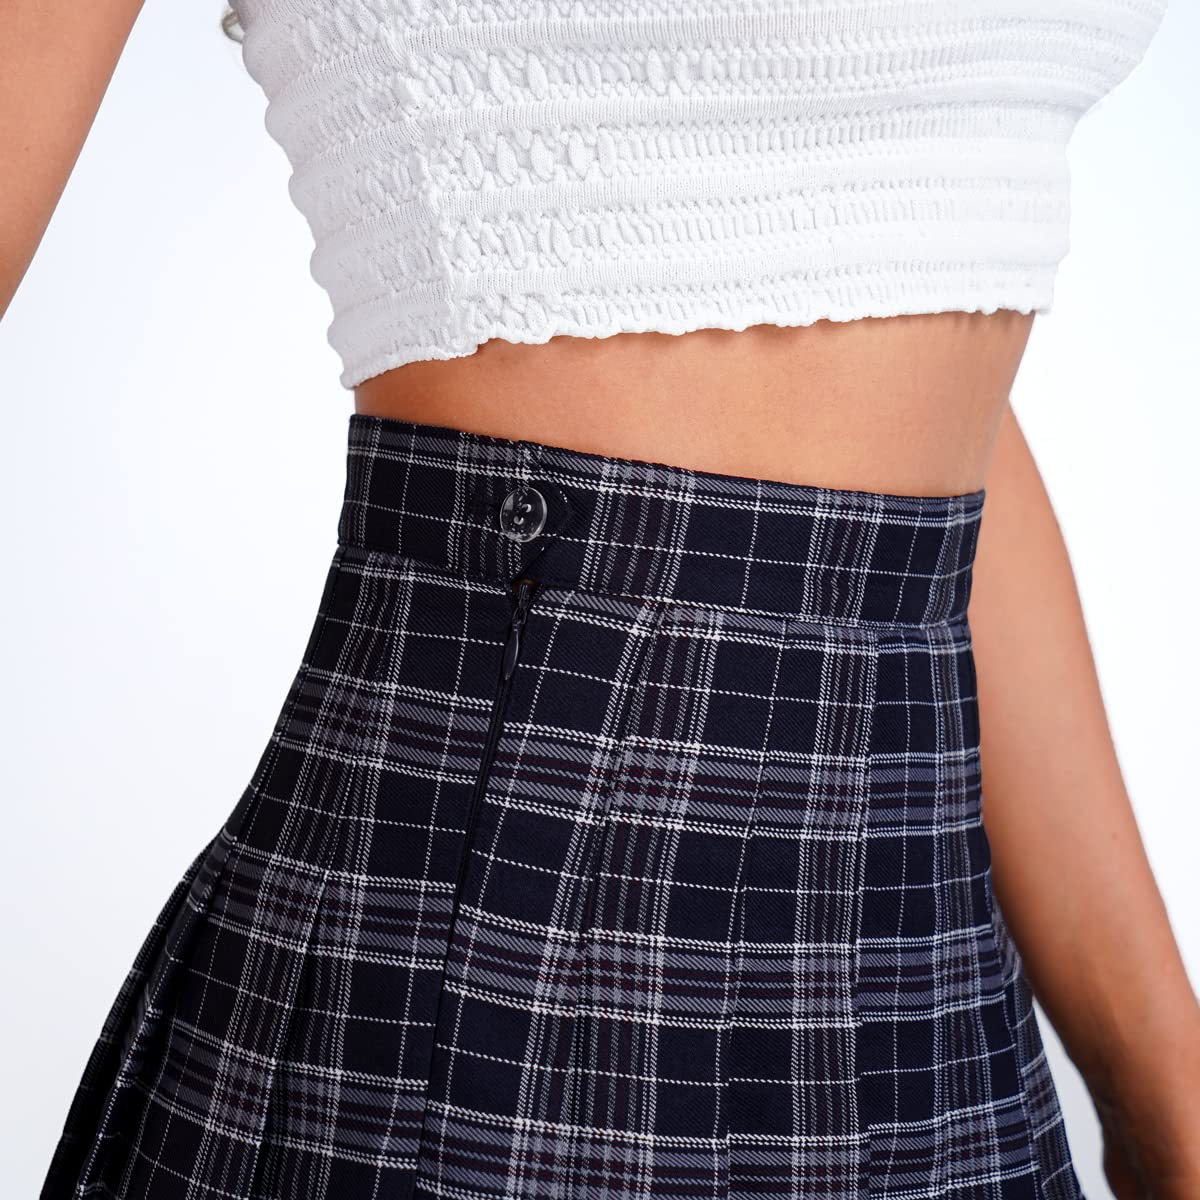 DJT FASHION Cute Pleated Navy Plaid Women's Girls Skater Tennis Skirt With Shorts